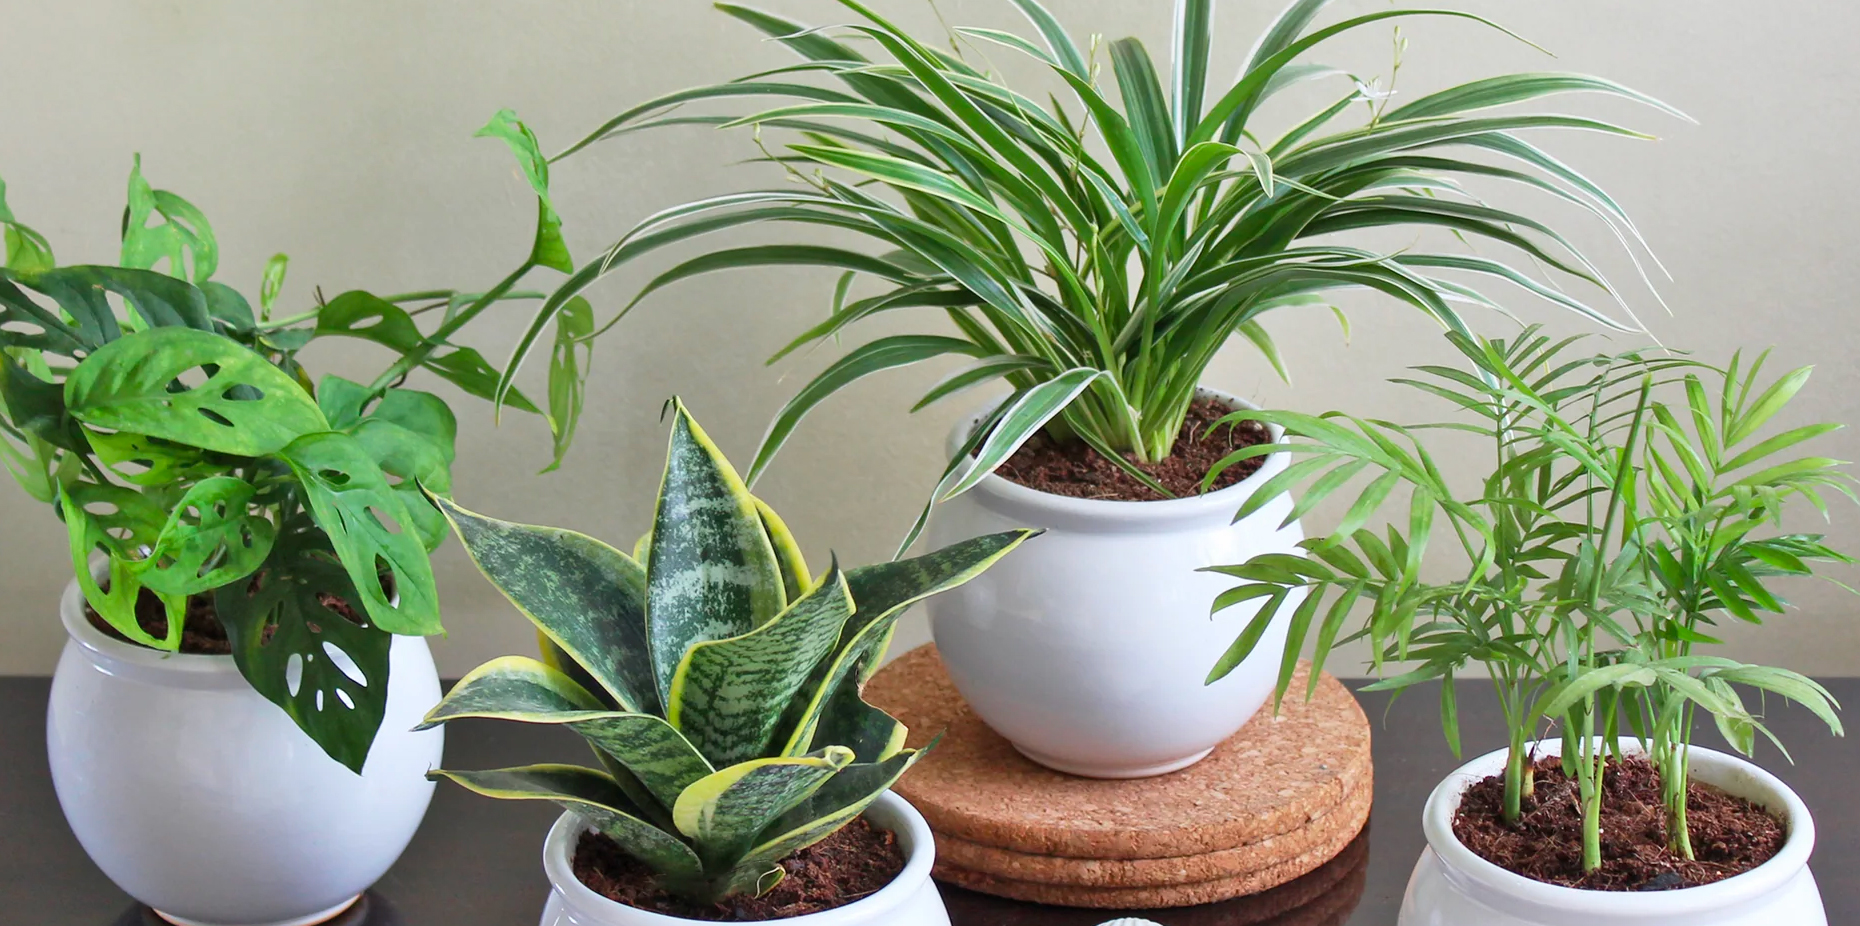 Best Indoor Air-Purifying Plants For Your Home